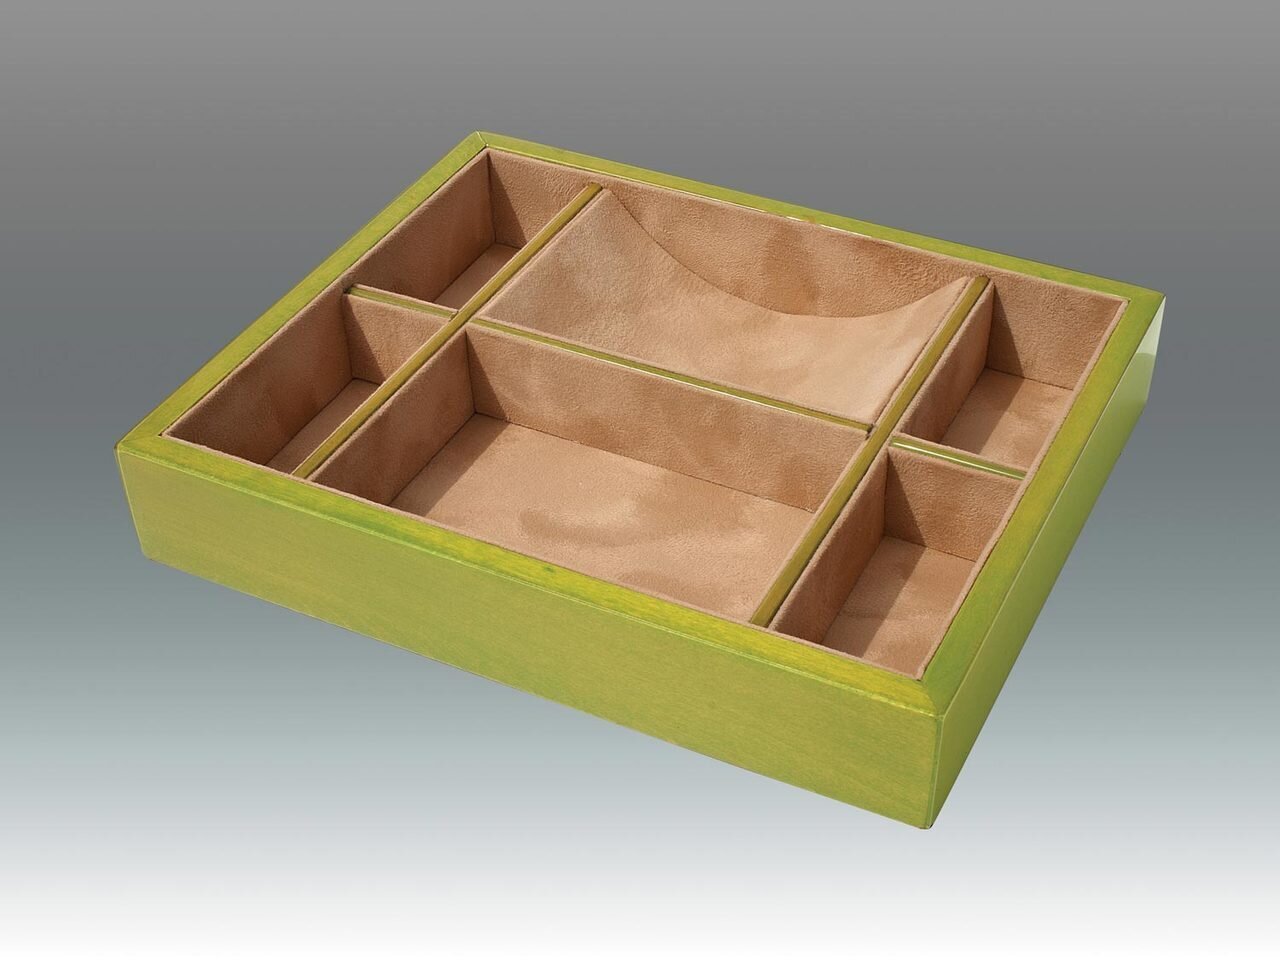 Tizo 10.25 x 8.25 Inch Sectional Wooden Valet Tray - Green